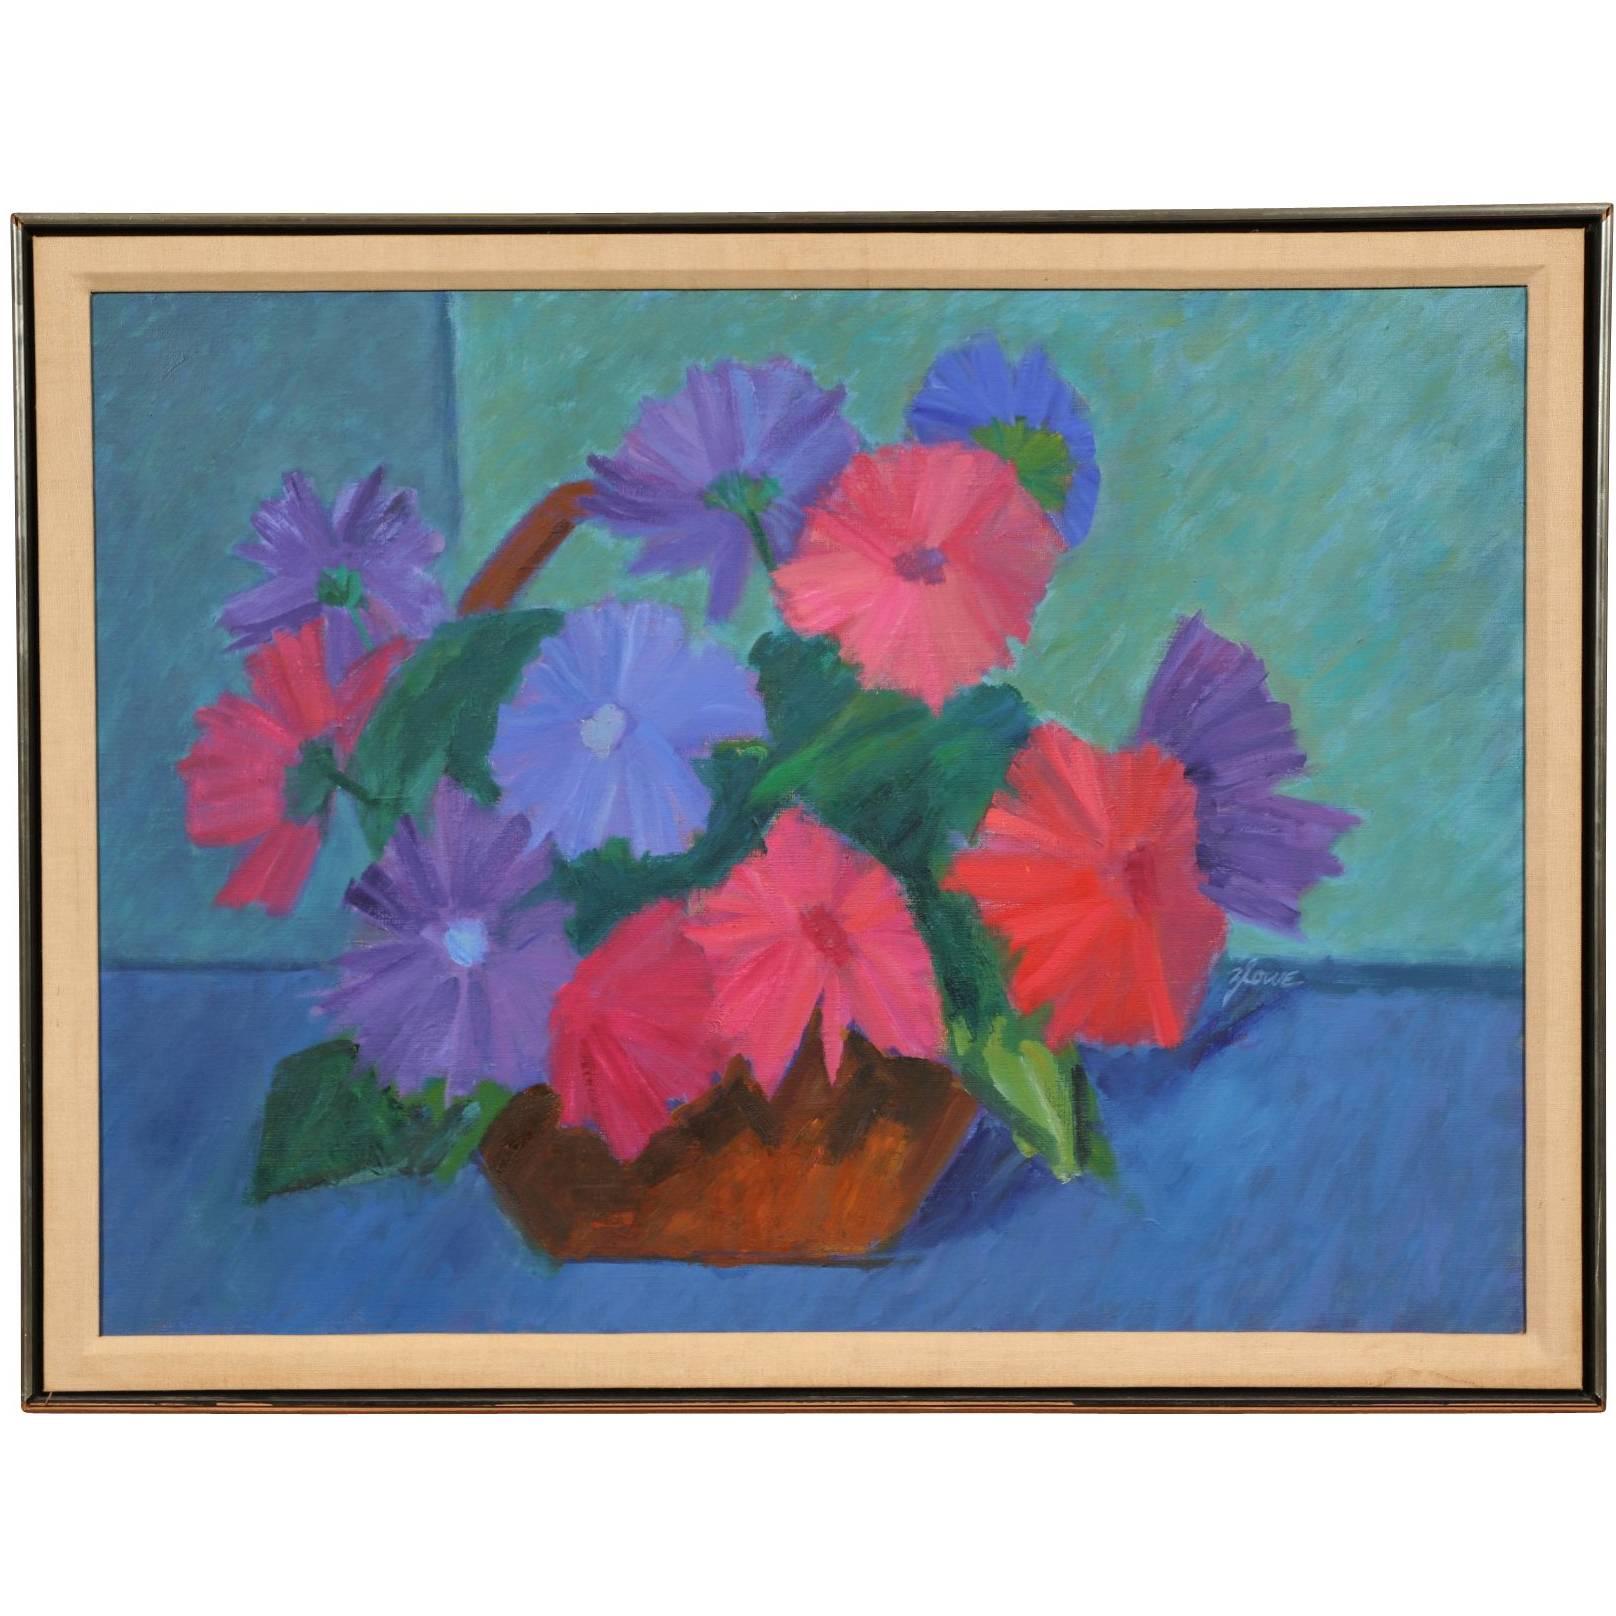 Florence Zlowe Oil on Canvas Titled "Basket of Flowers"